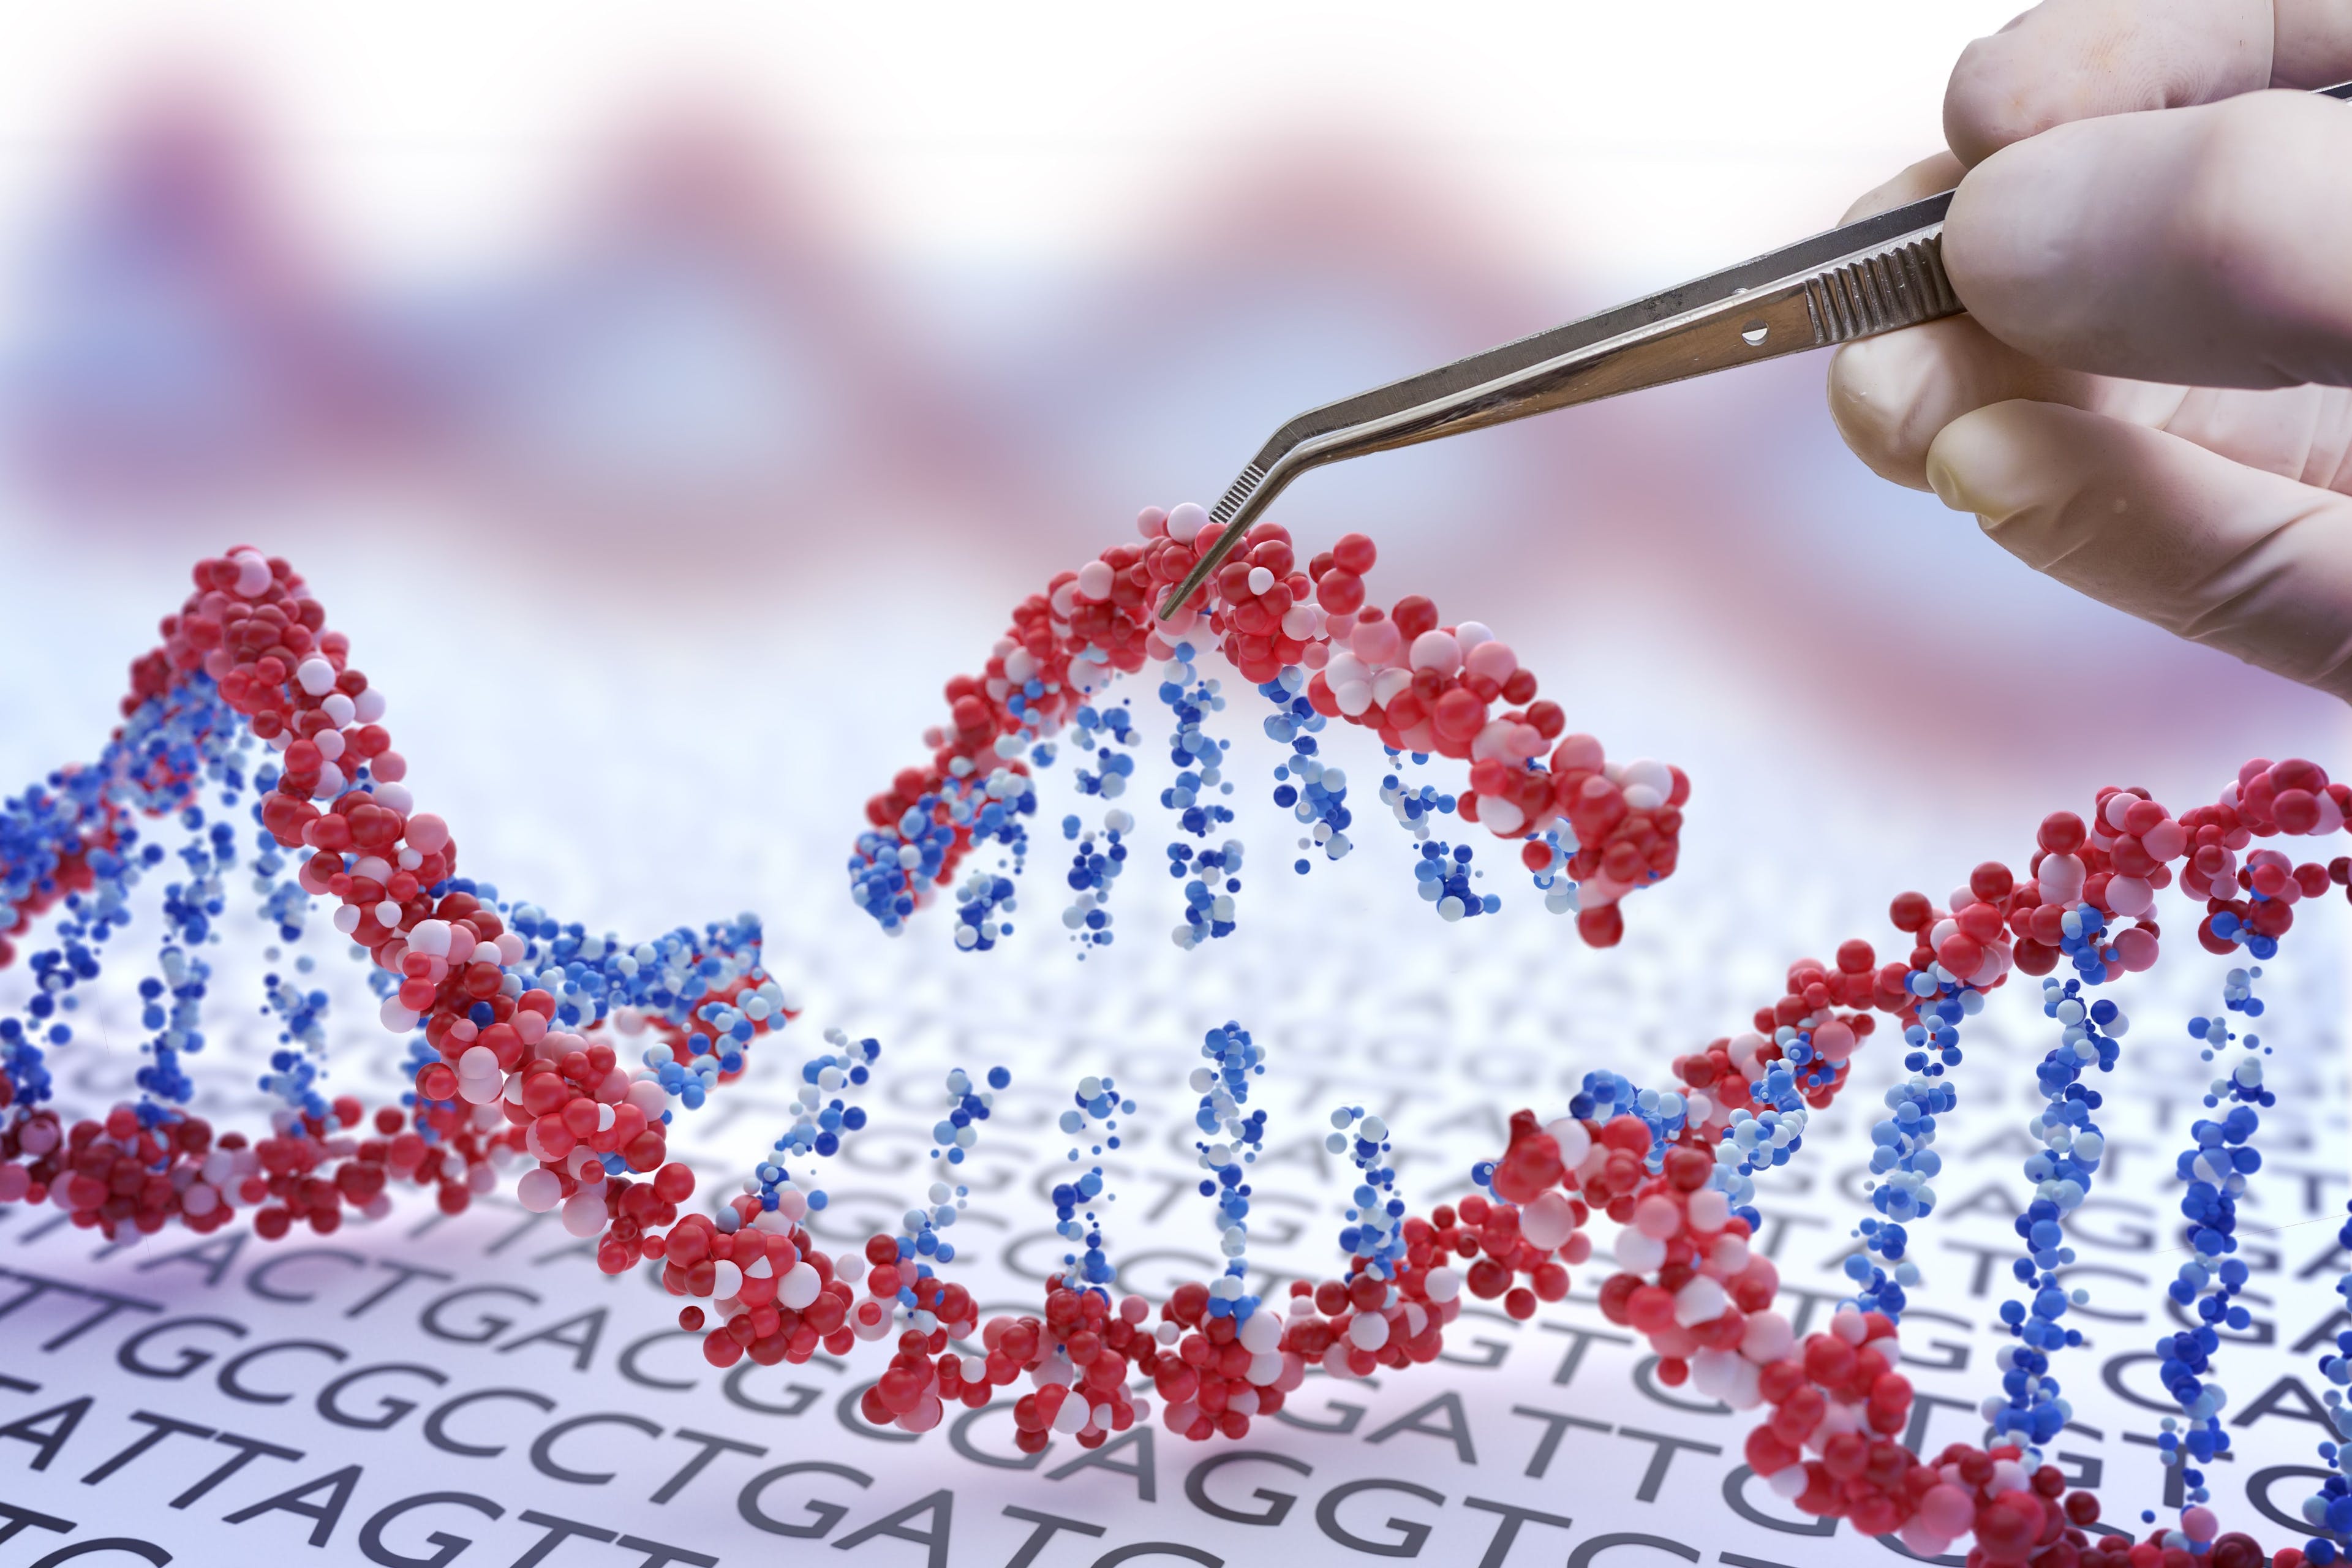 Genetic engineering, GMO and Gene manipulation concept. Hand is inserting sequence of DNA. 3D illustration of DNA. | Image Credit: © vchalup - stock.adobe.com